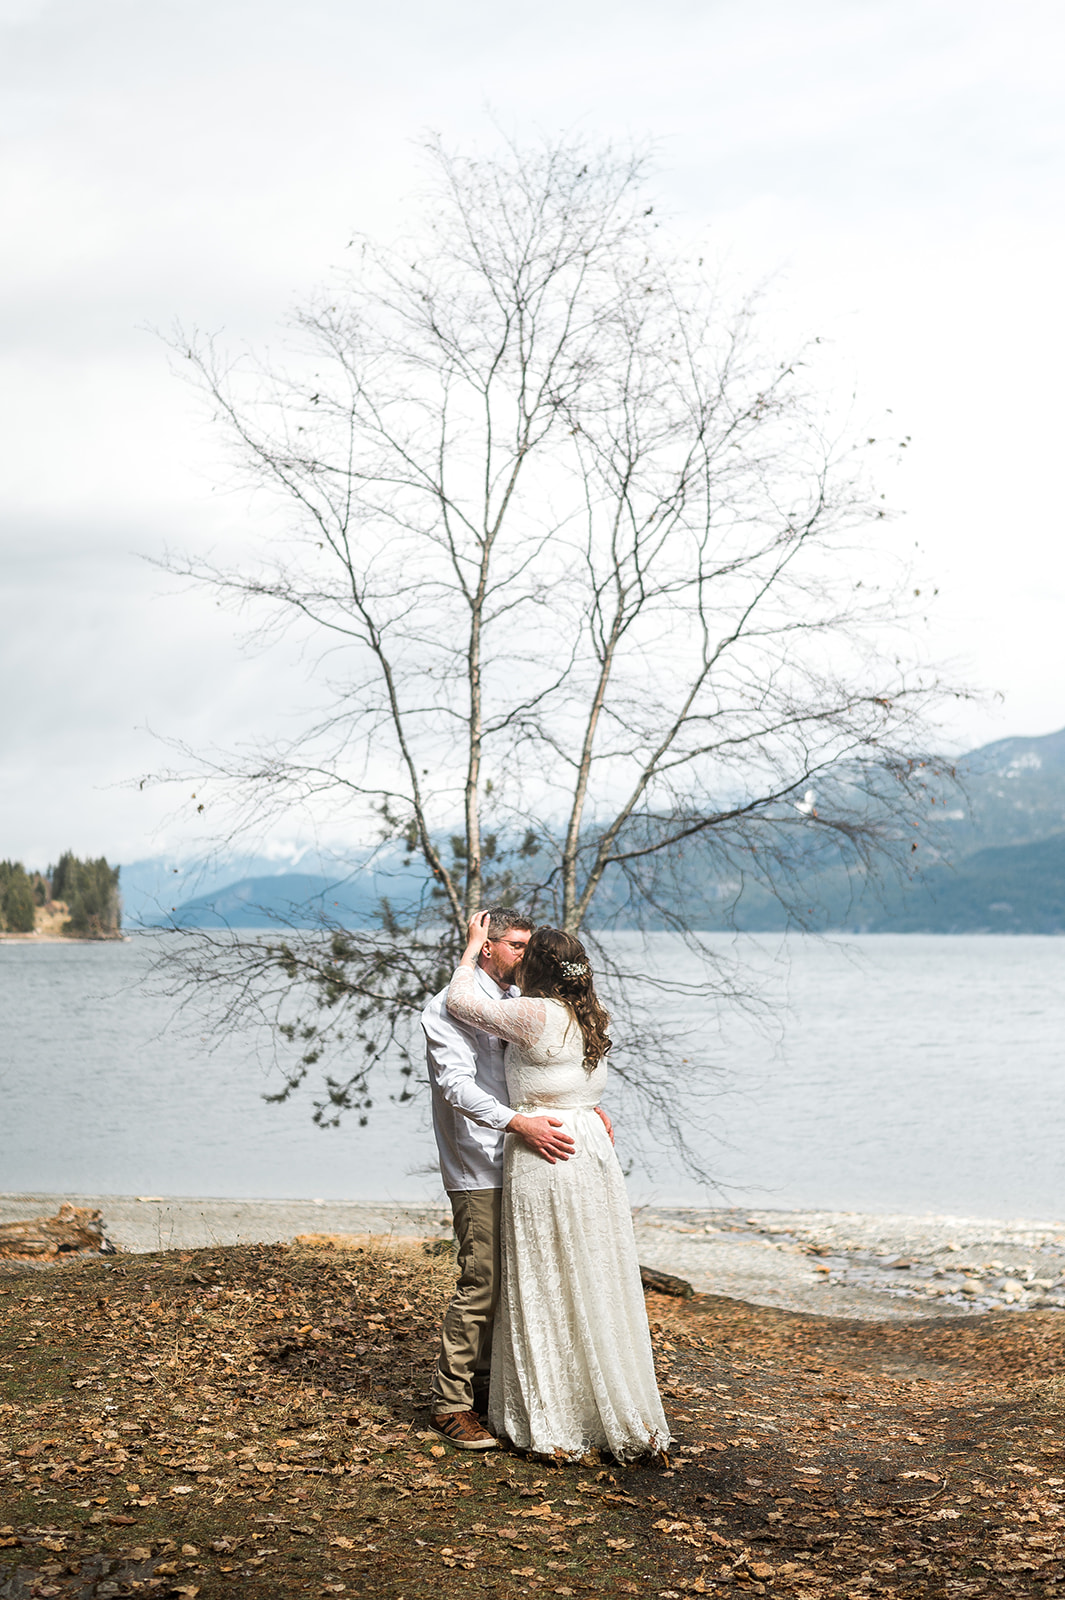 The bride and groom sharing a kiss, framed by a tree in front of the lake.